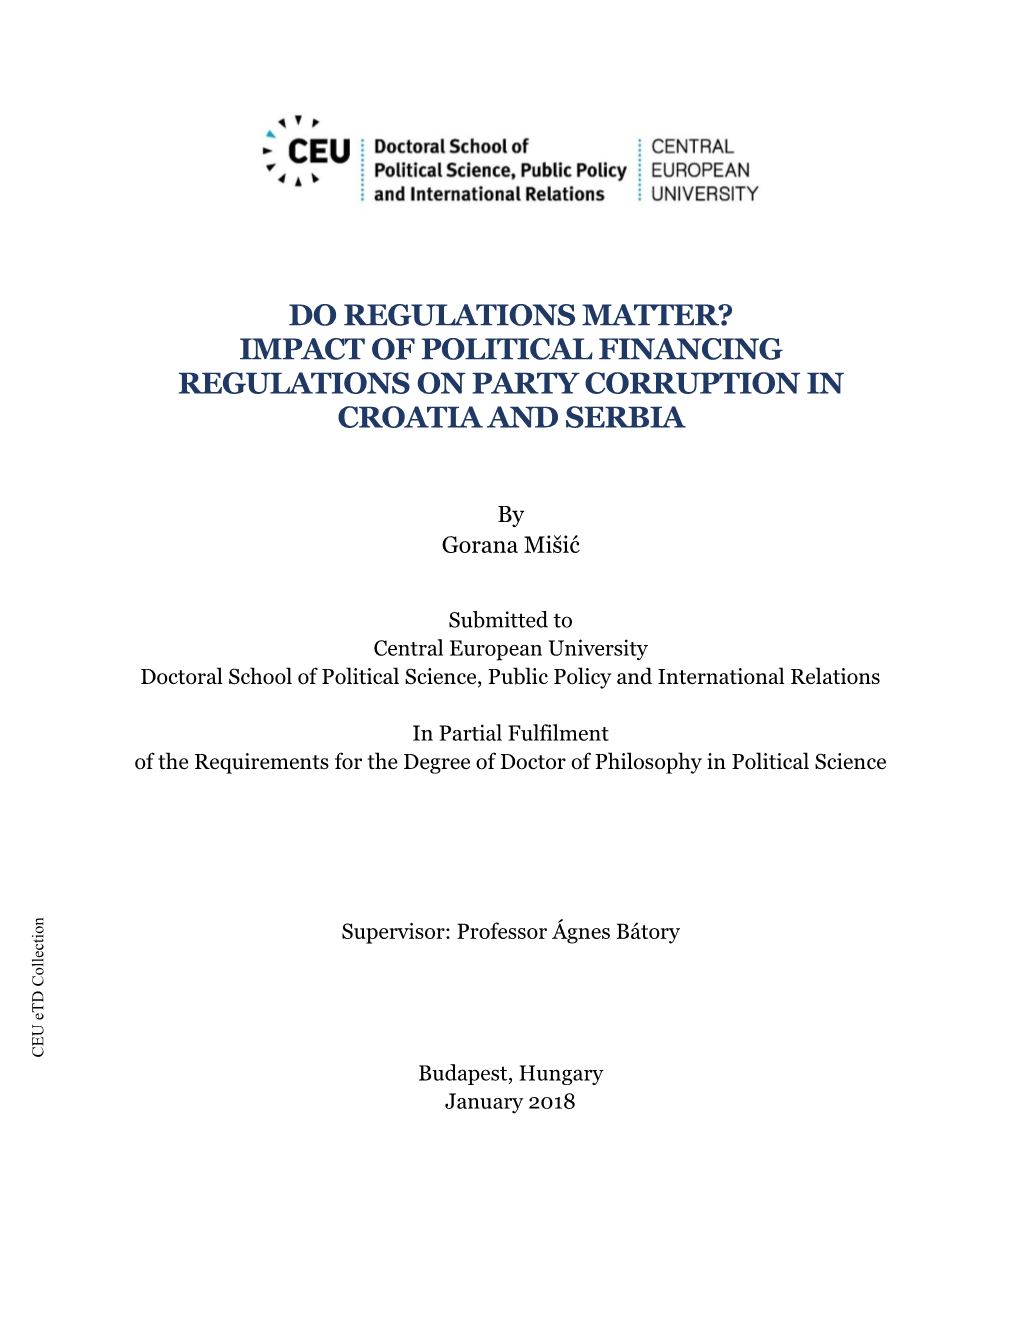 Impact of Political Financing Regulations on Party Corruption in Croatia and Serbia